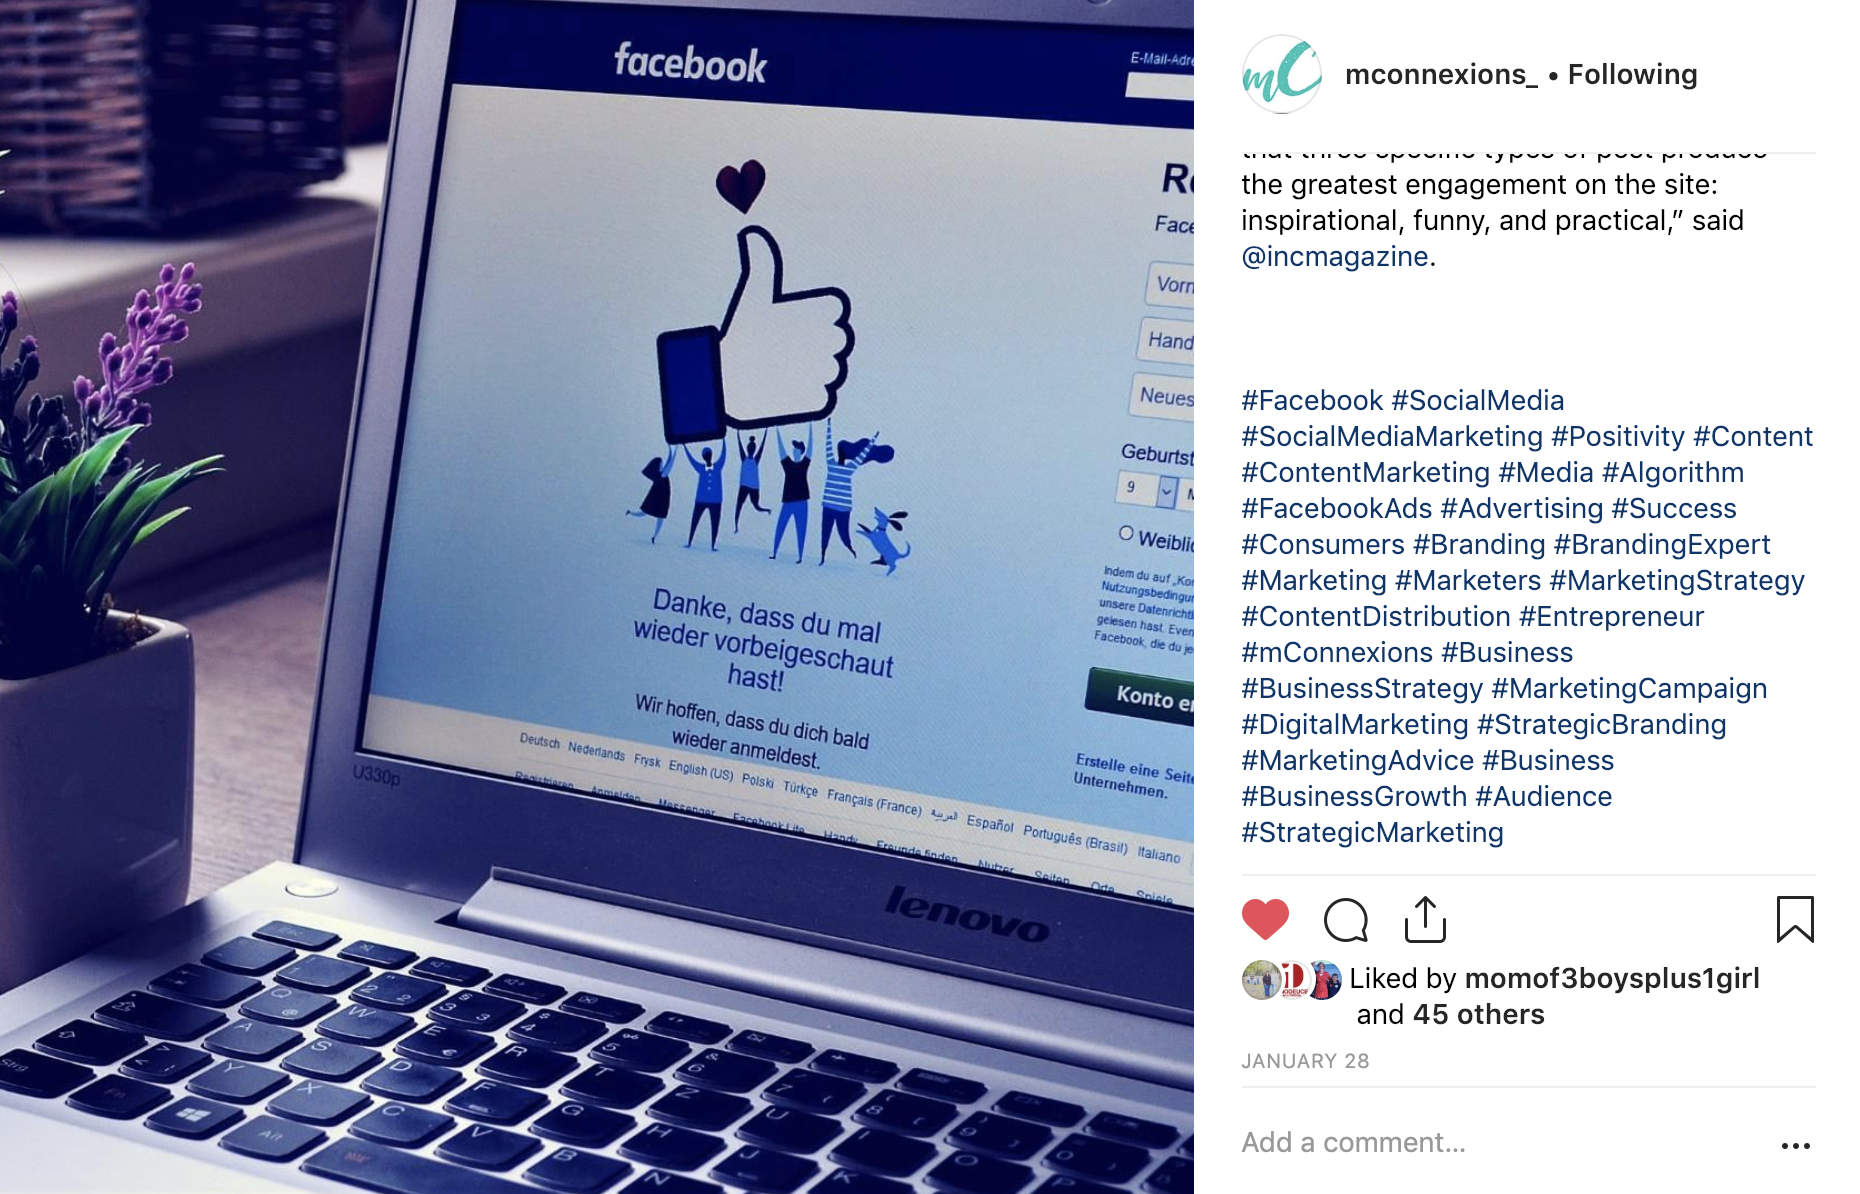 Instagram Hashtags - Example from mConnexions